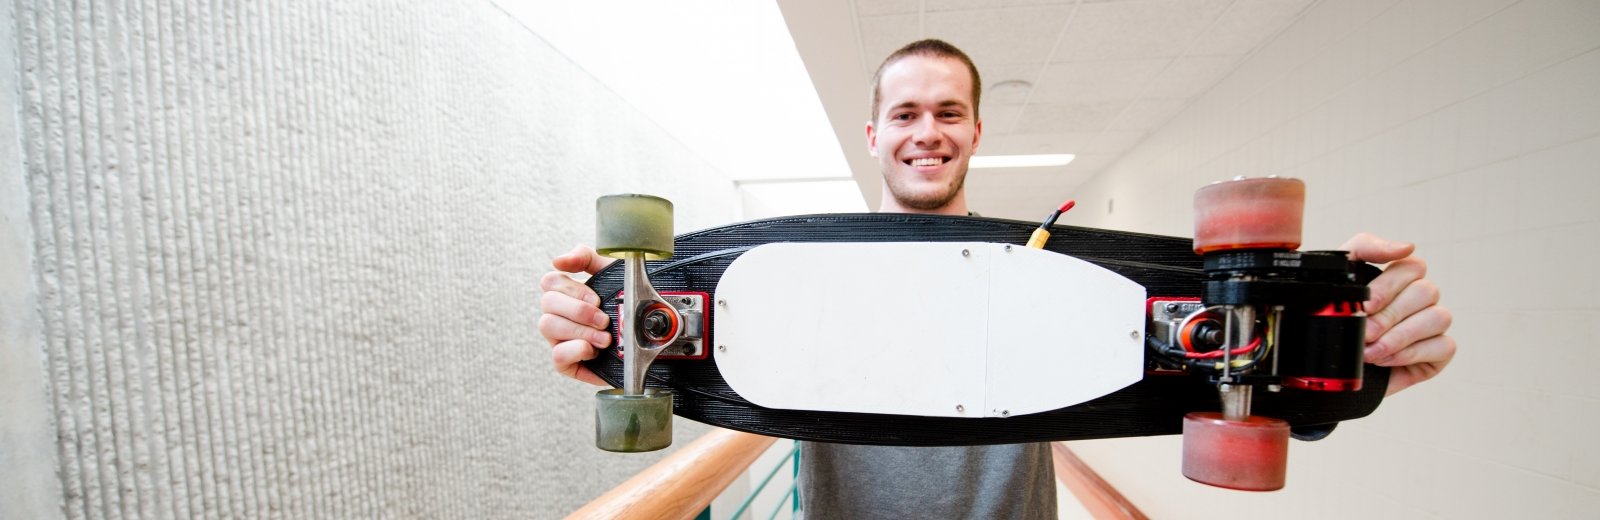 The Gigabot X can print large items like skateboards, kayak paddles and snowshoes.